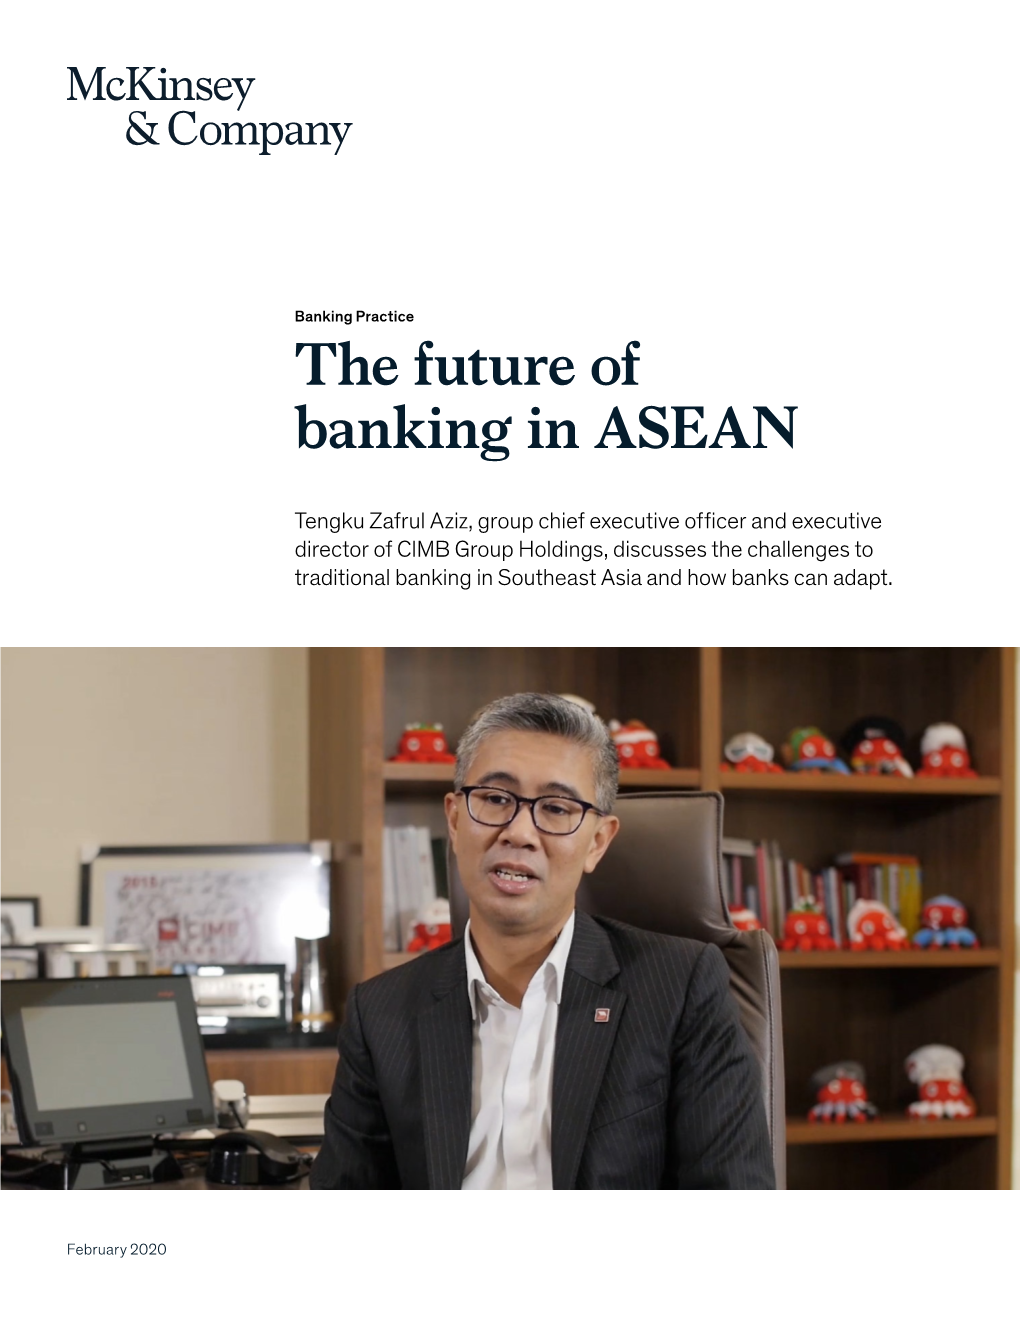 The Future of Banking in ASEAN